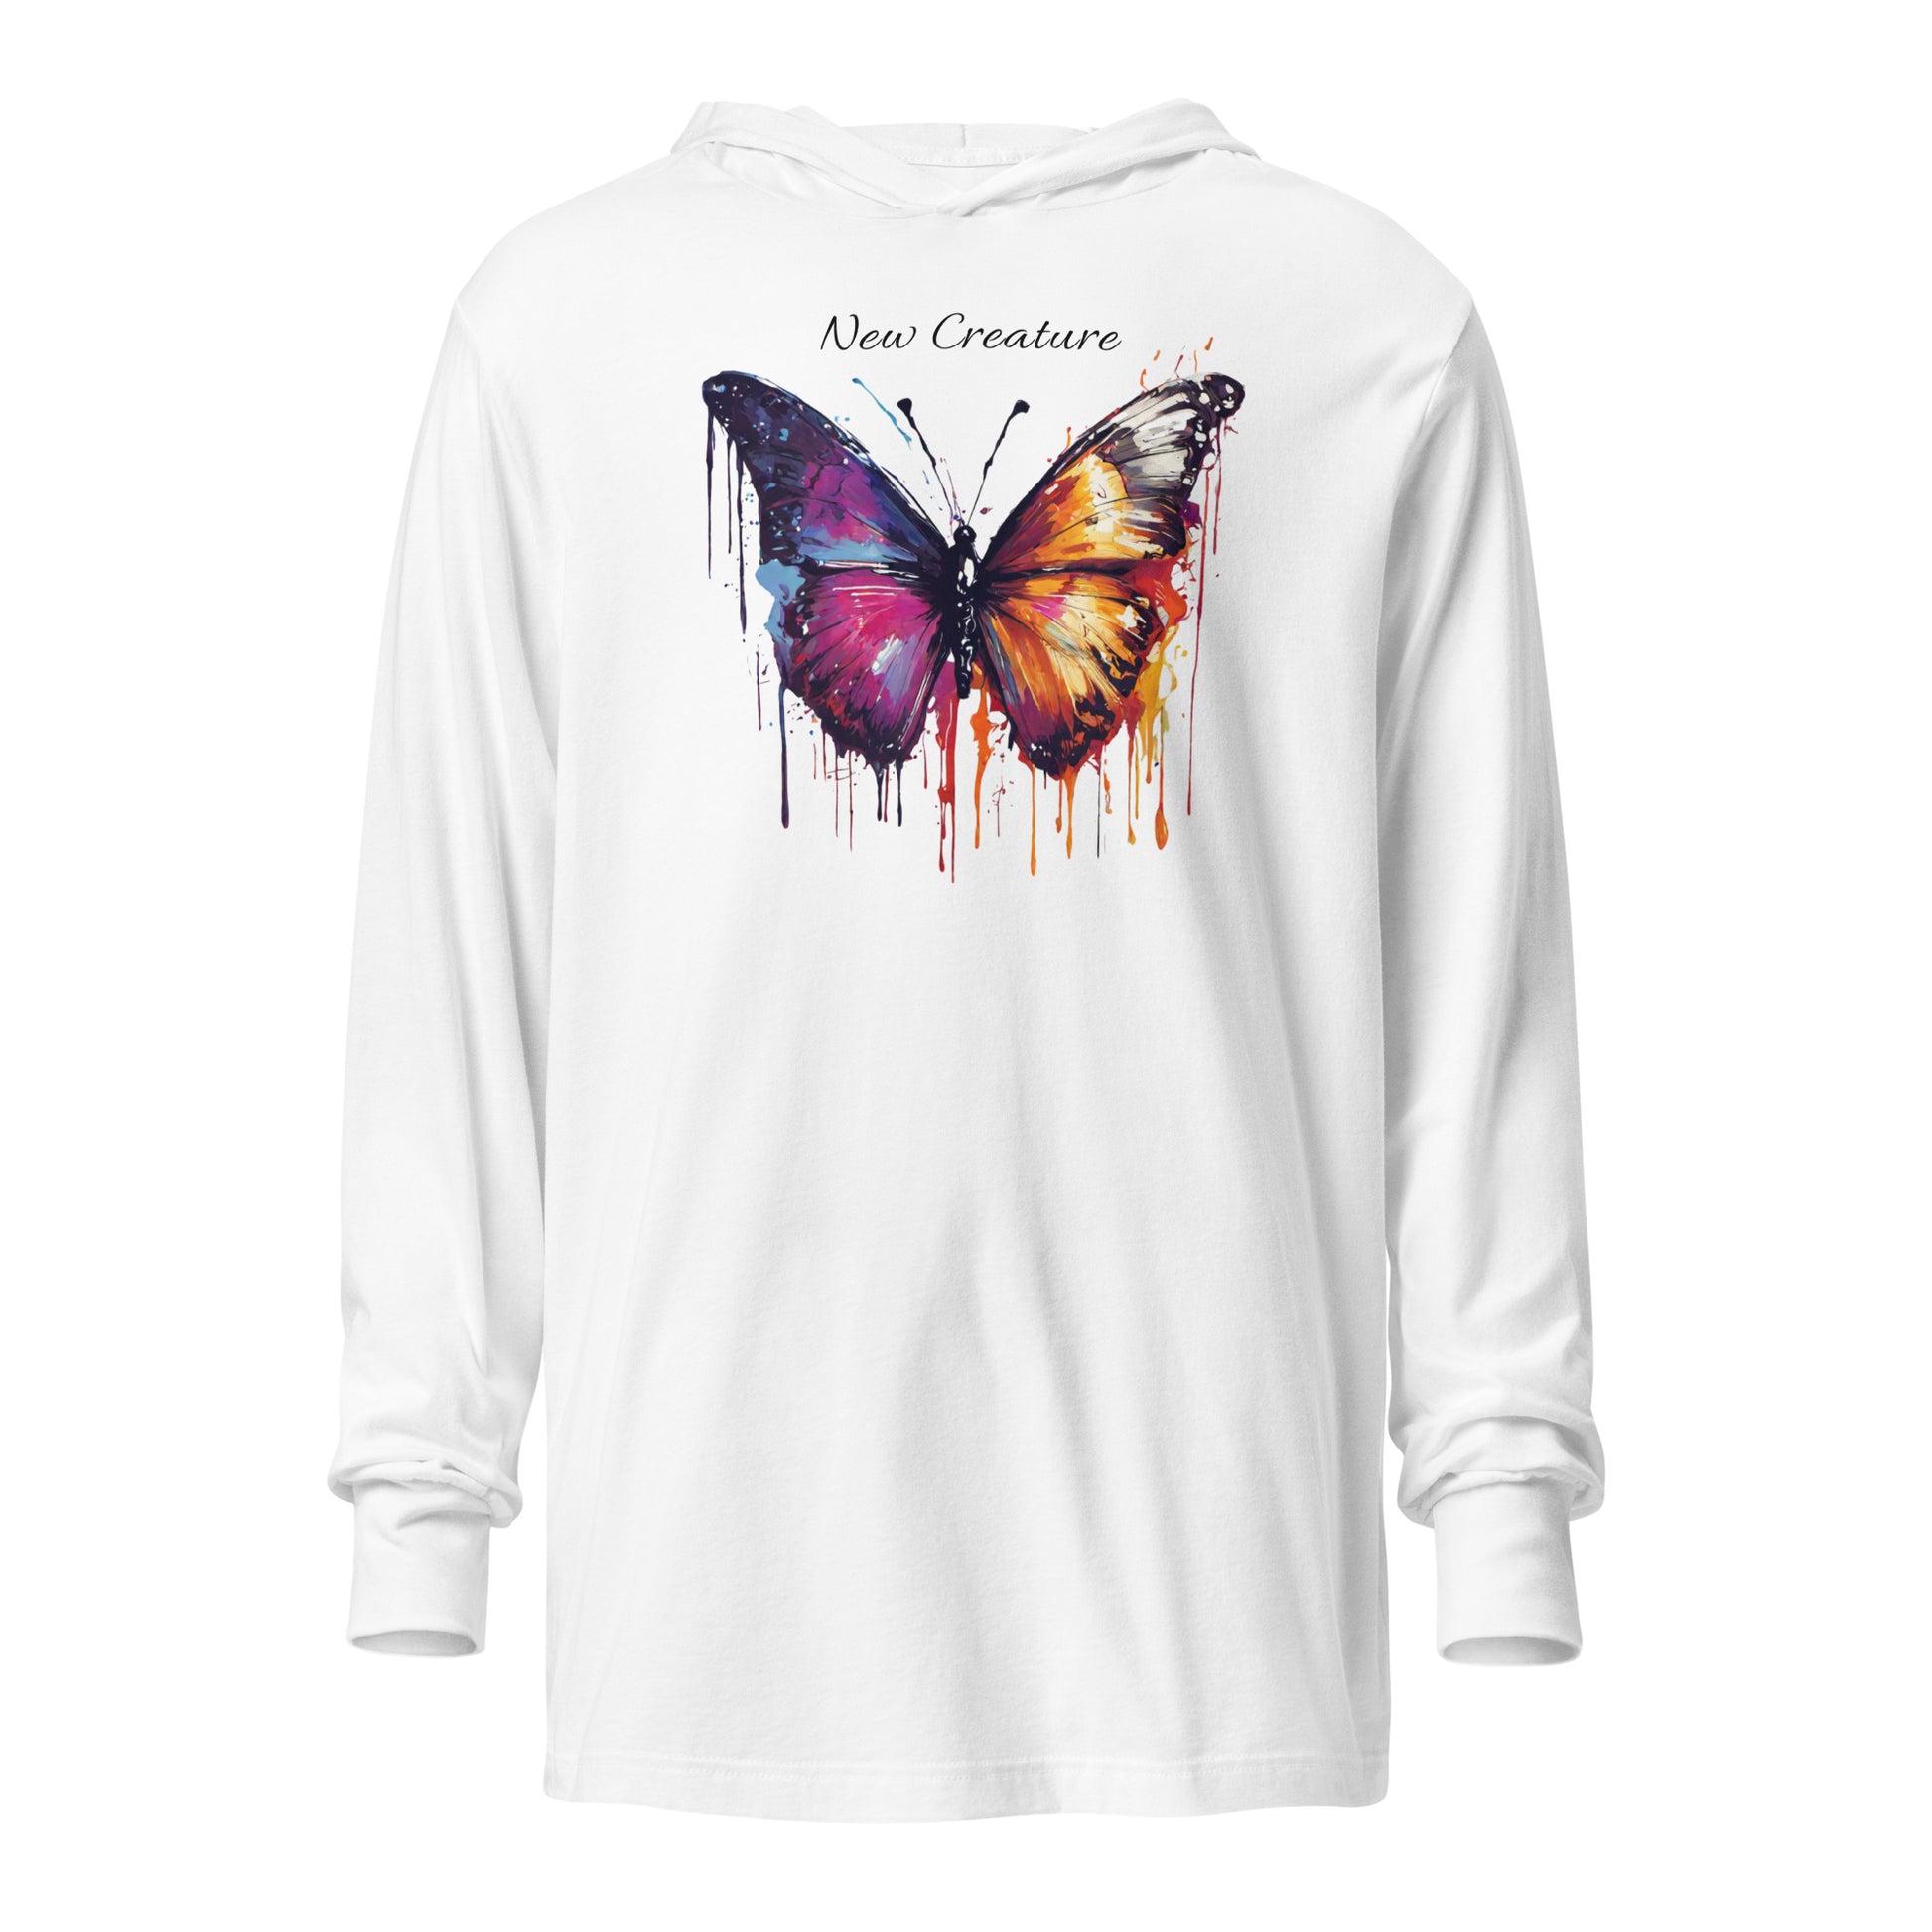 New Creature Christian Women's Beautiful Graphic Hooded Long-Sleeve Tee White